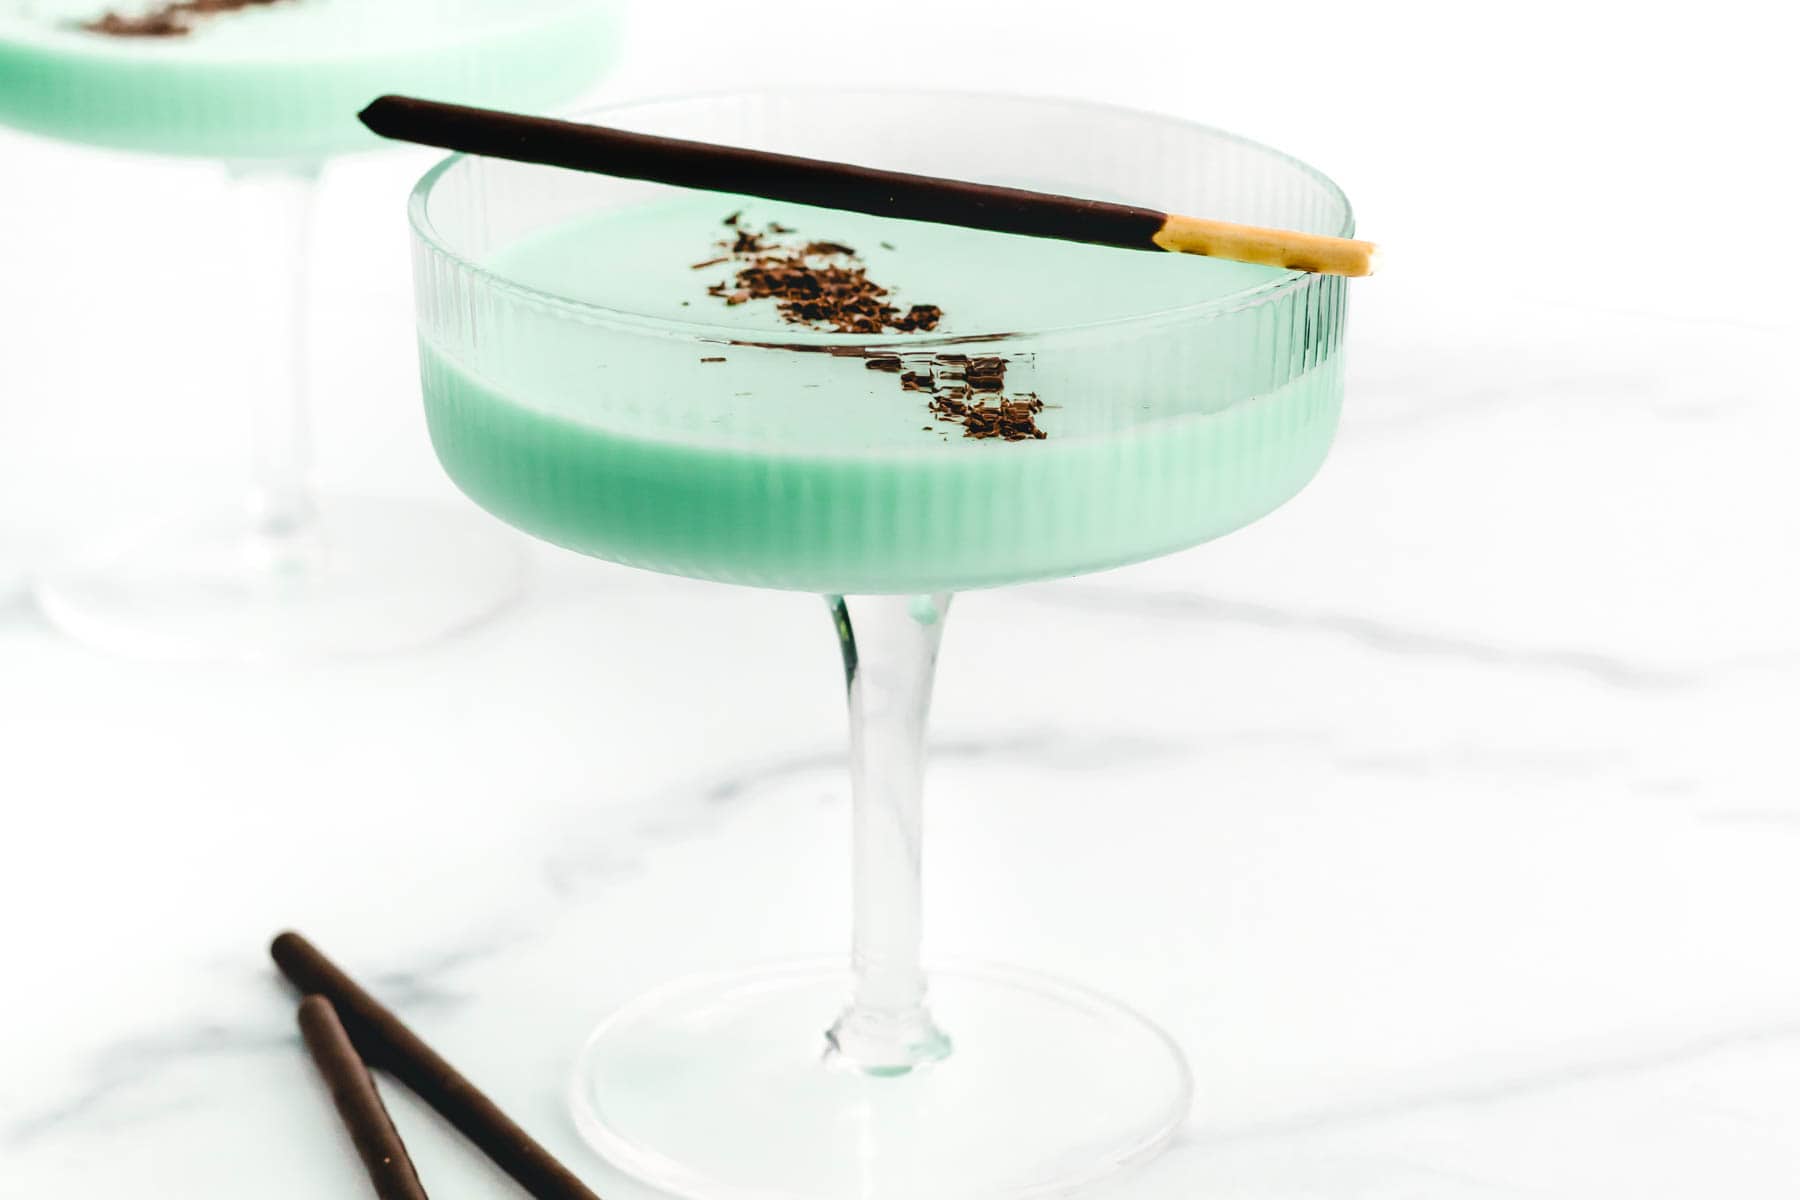 A cocktail with mint and chocolate garnishes in a martini glass.